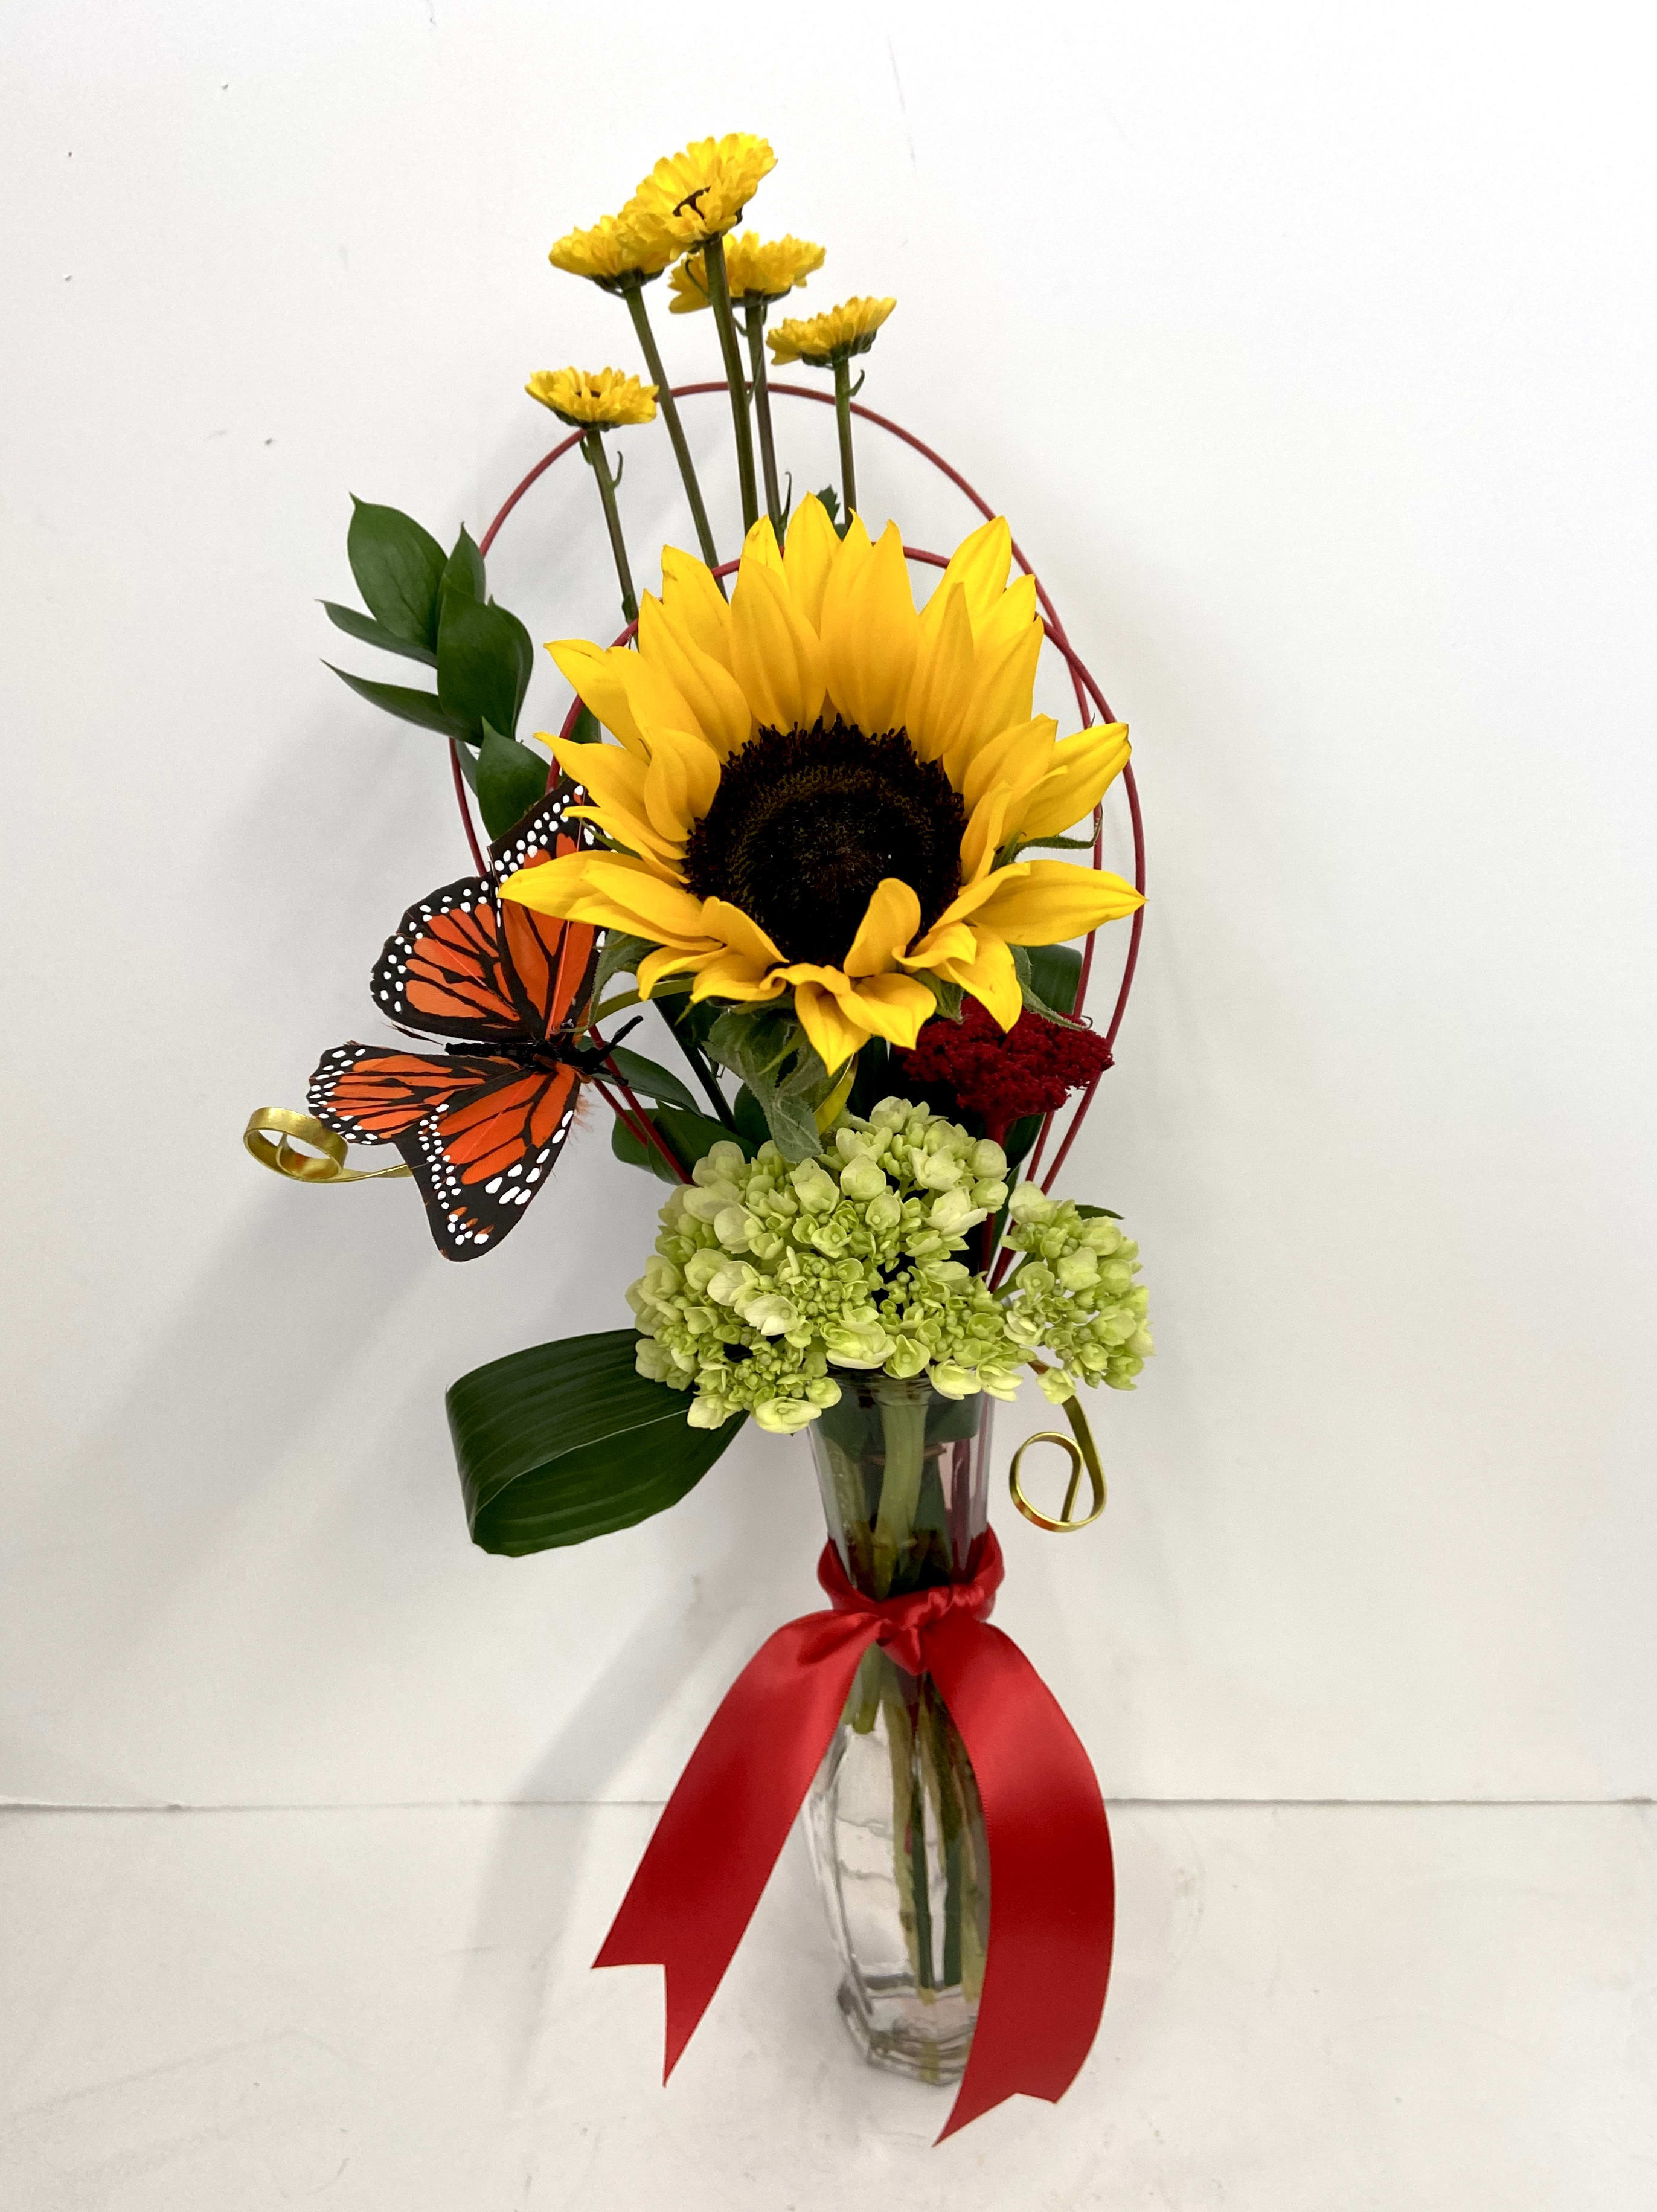 My Loyal Sunflower - Sunflower, which means loyal in the Language of Flowers, stands tall with decorative wire and butterfly.